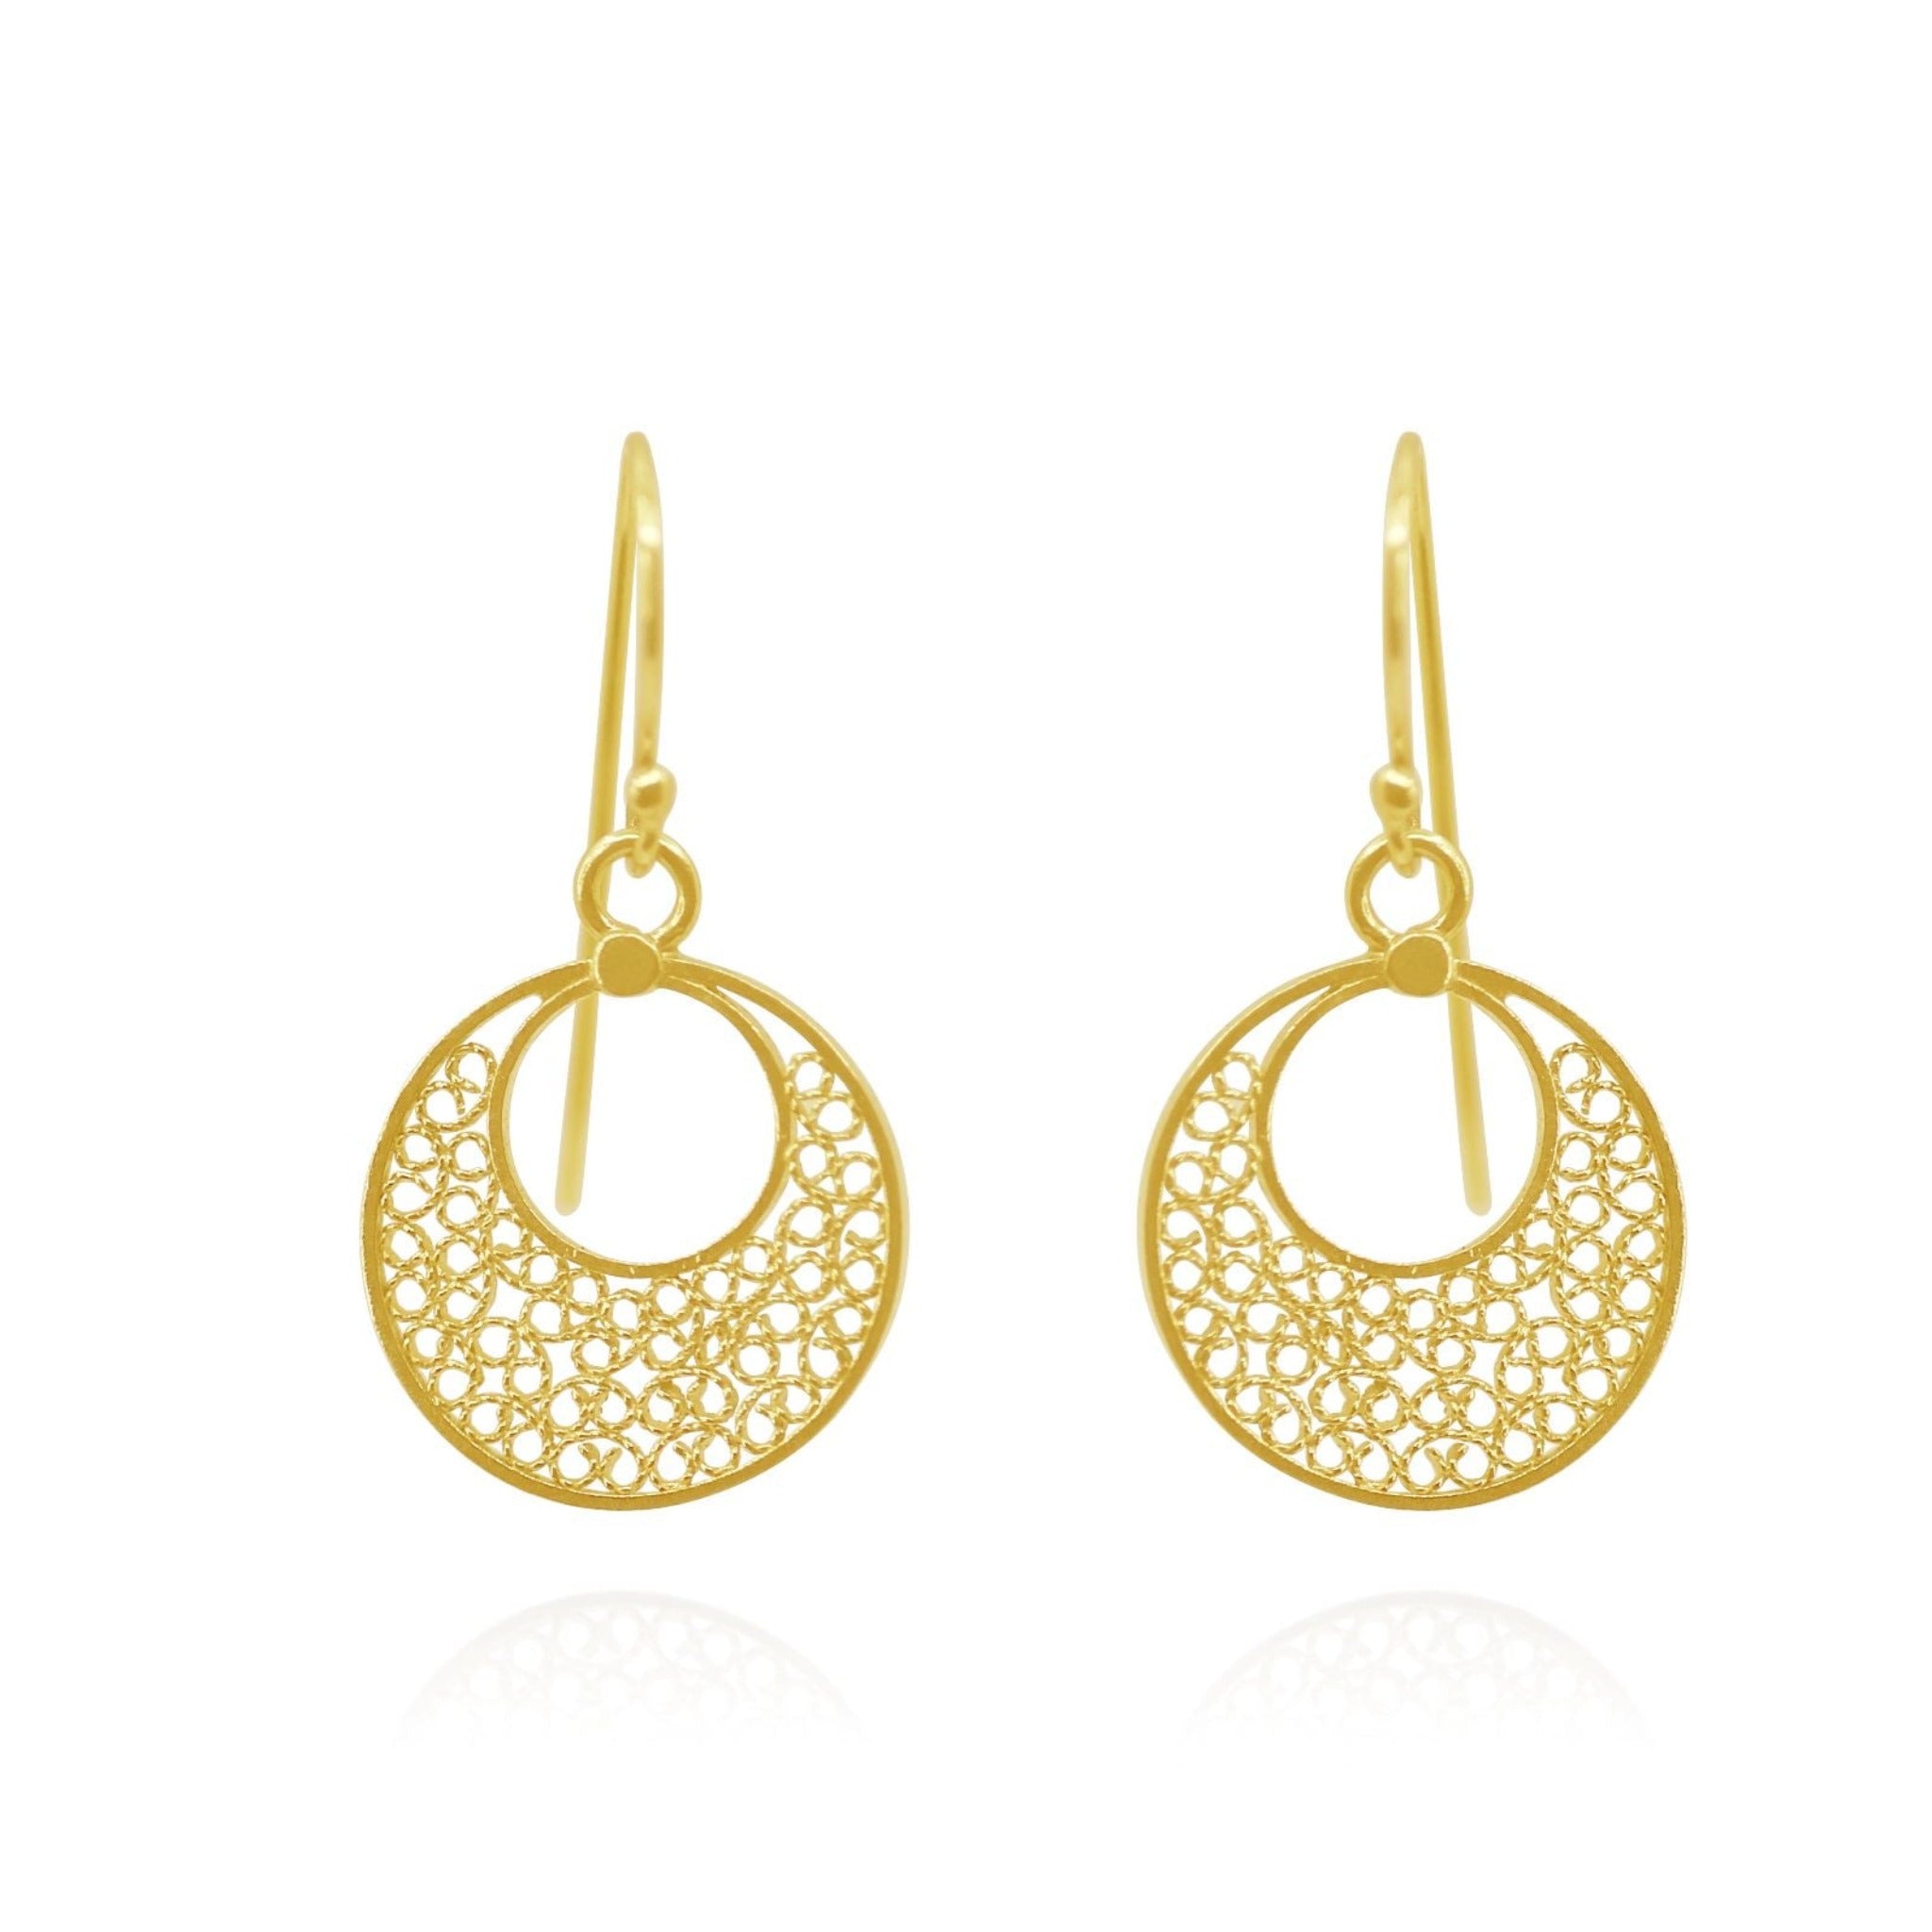 PILE SOLID GOLD 18K SMALL EARRINGS FILIGREE